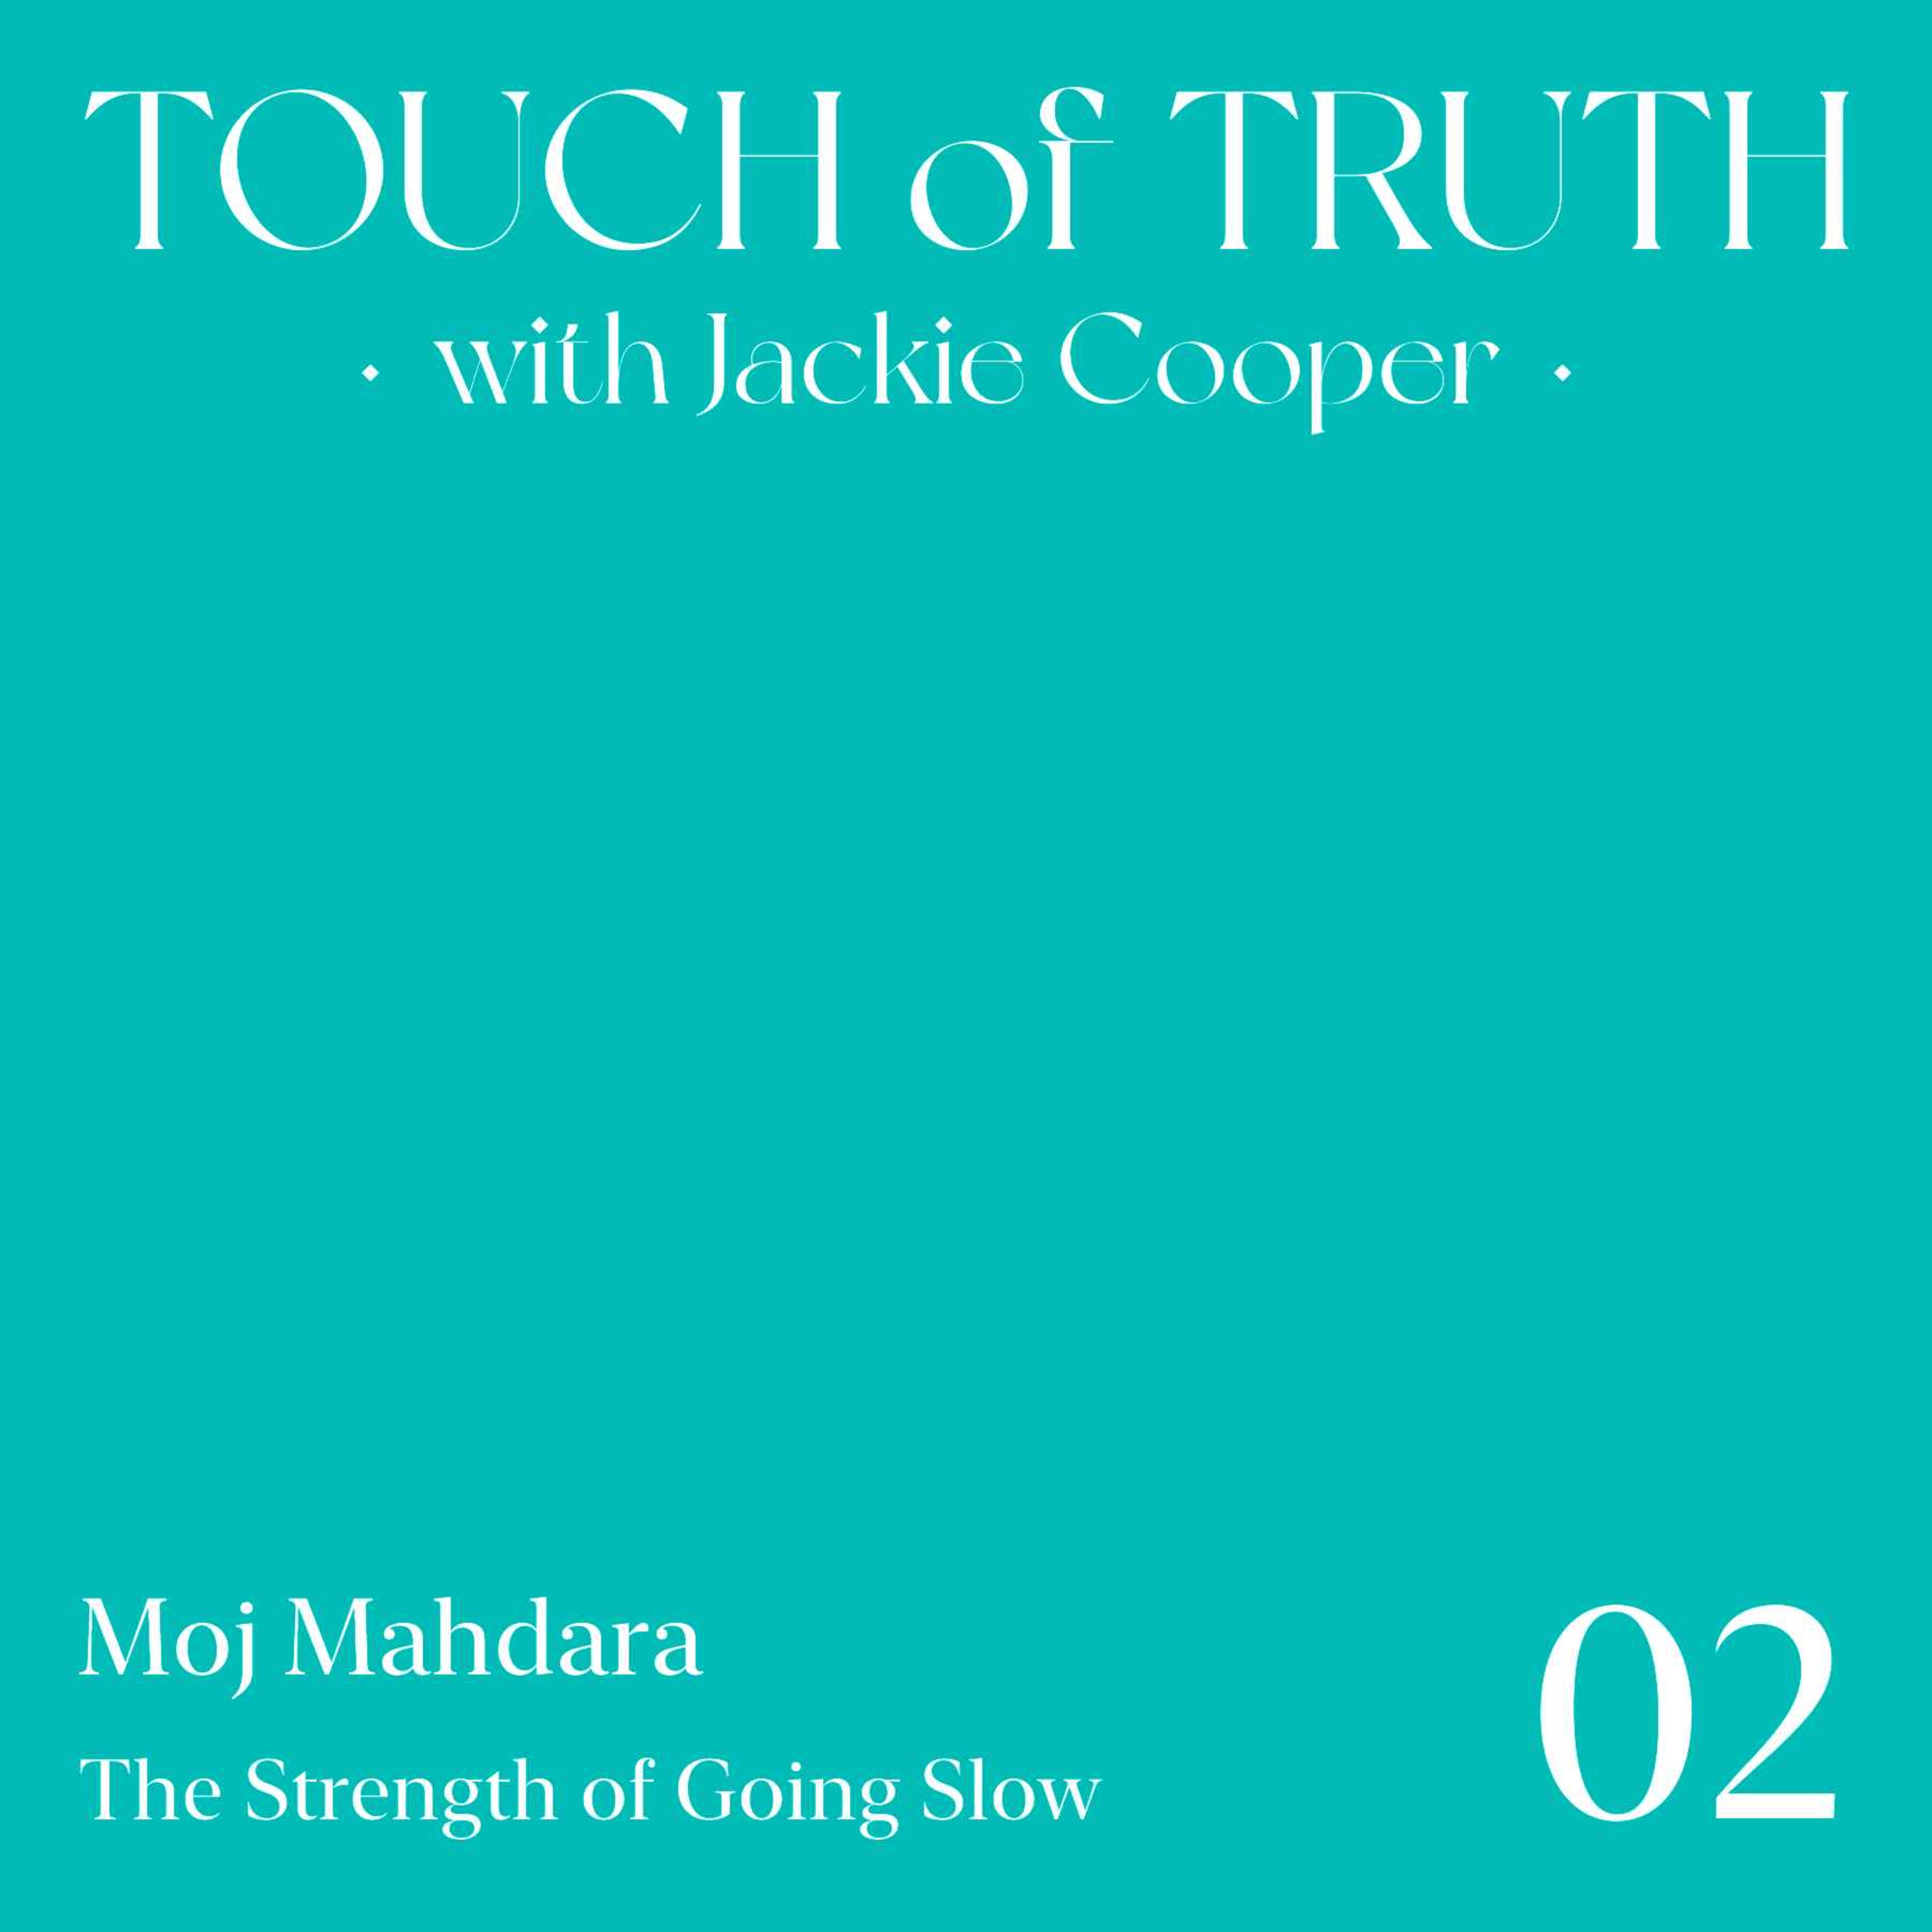 The Strength of Going Slow with Moj Mahdara